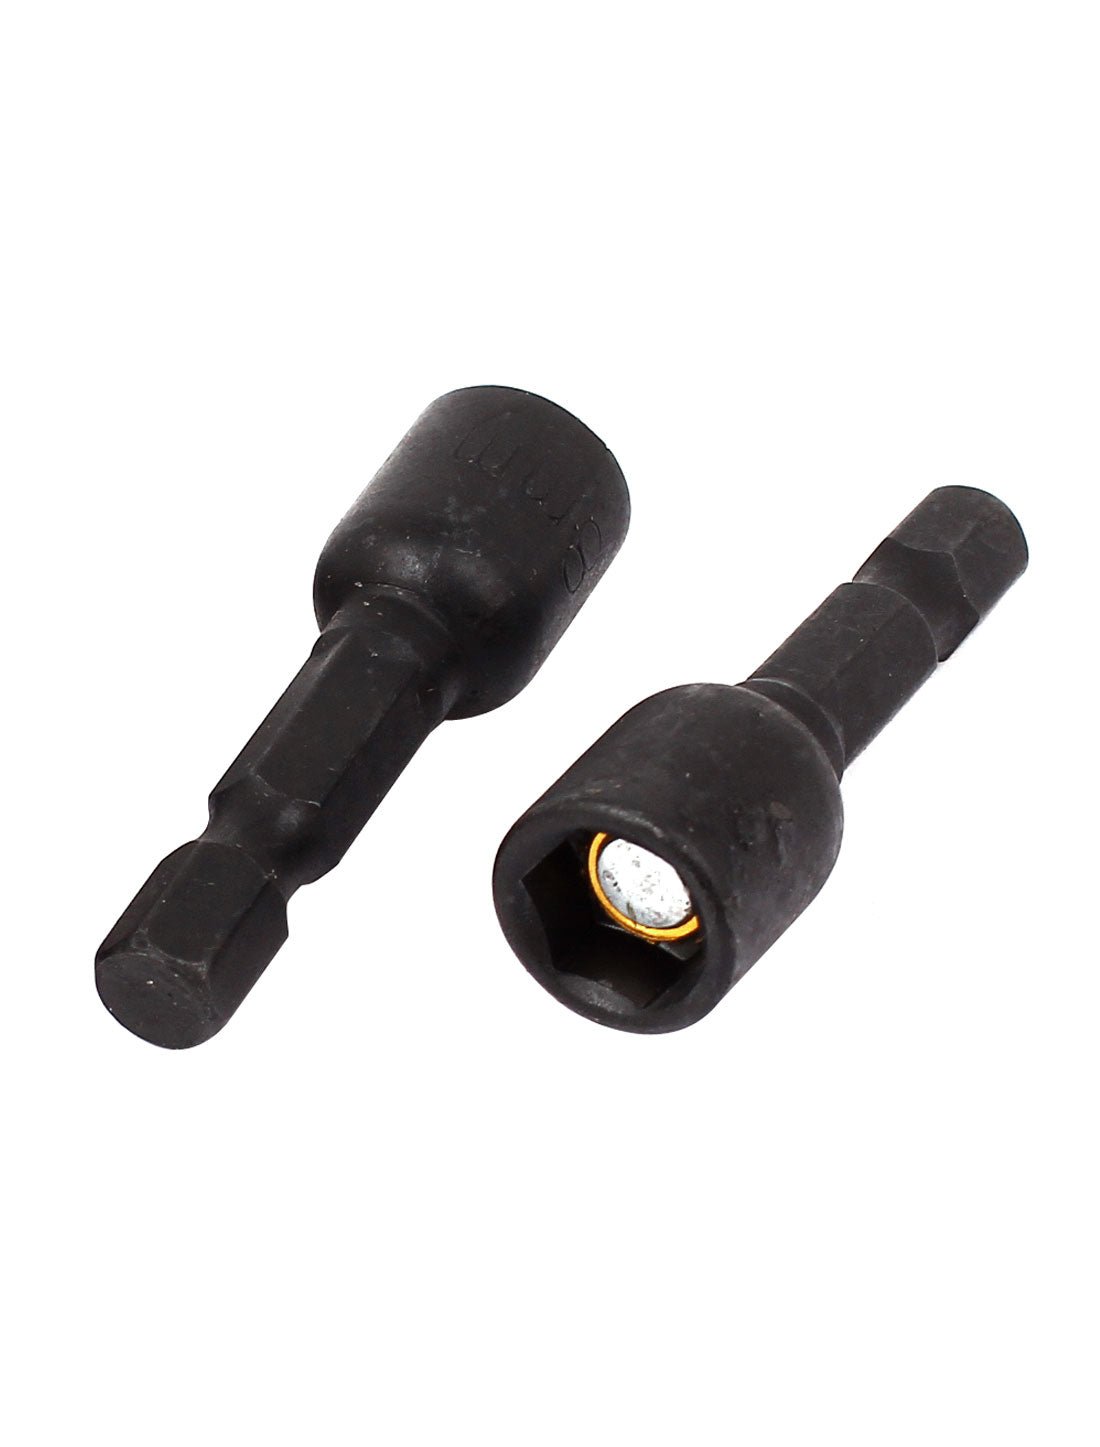 uxcell Uxcell 1/4" Shank 8mm 5/16" Hex Magnetic Nut Driver Bit Socket Adapter Black 3 Pcs